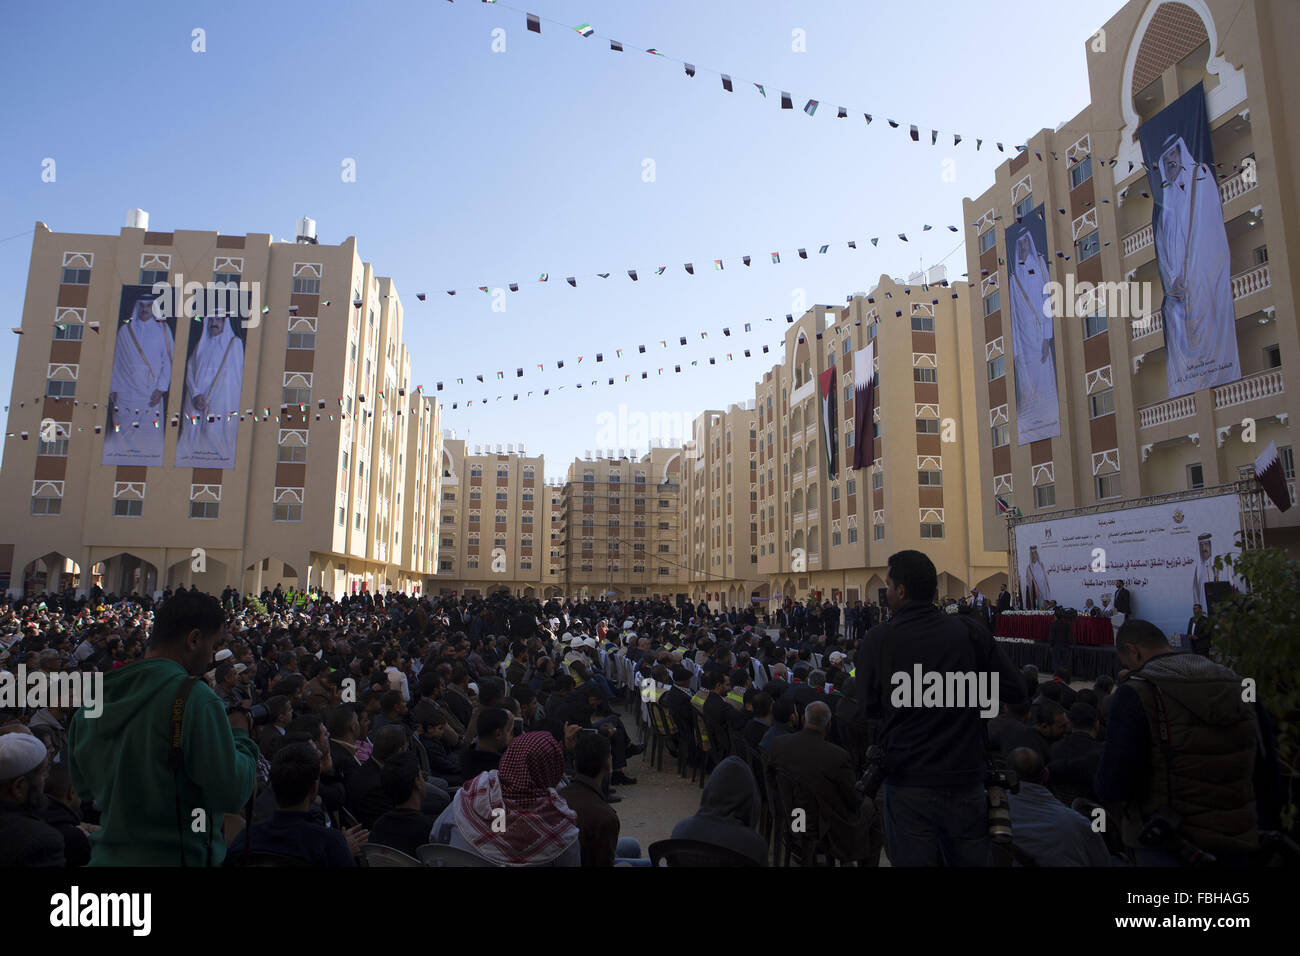 Khan Younis, Gaza Strip, Palestinian Territory. 16th Jan, 2016. Palestinians gather at the Qatari-funded Hamad City housing complex in Khan Younis, southern Gaza Strip, Saturday, Jan. 16, 2016. More than 1,000 Palestinian families have taken possession of new apartments in the first phase of the large housing project that sits on dunes that were part of the former Israeli Jewish settlement of Gush Katif. Huge portraits of former Qatari ruler, Sheik Hamad bin Khalifa Al Thani, right, his son, the current emir, Tamim bin Hamad bin Khalifa Al Thani, and the Qatari flag hang on one of the buildin Stock Photo